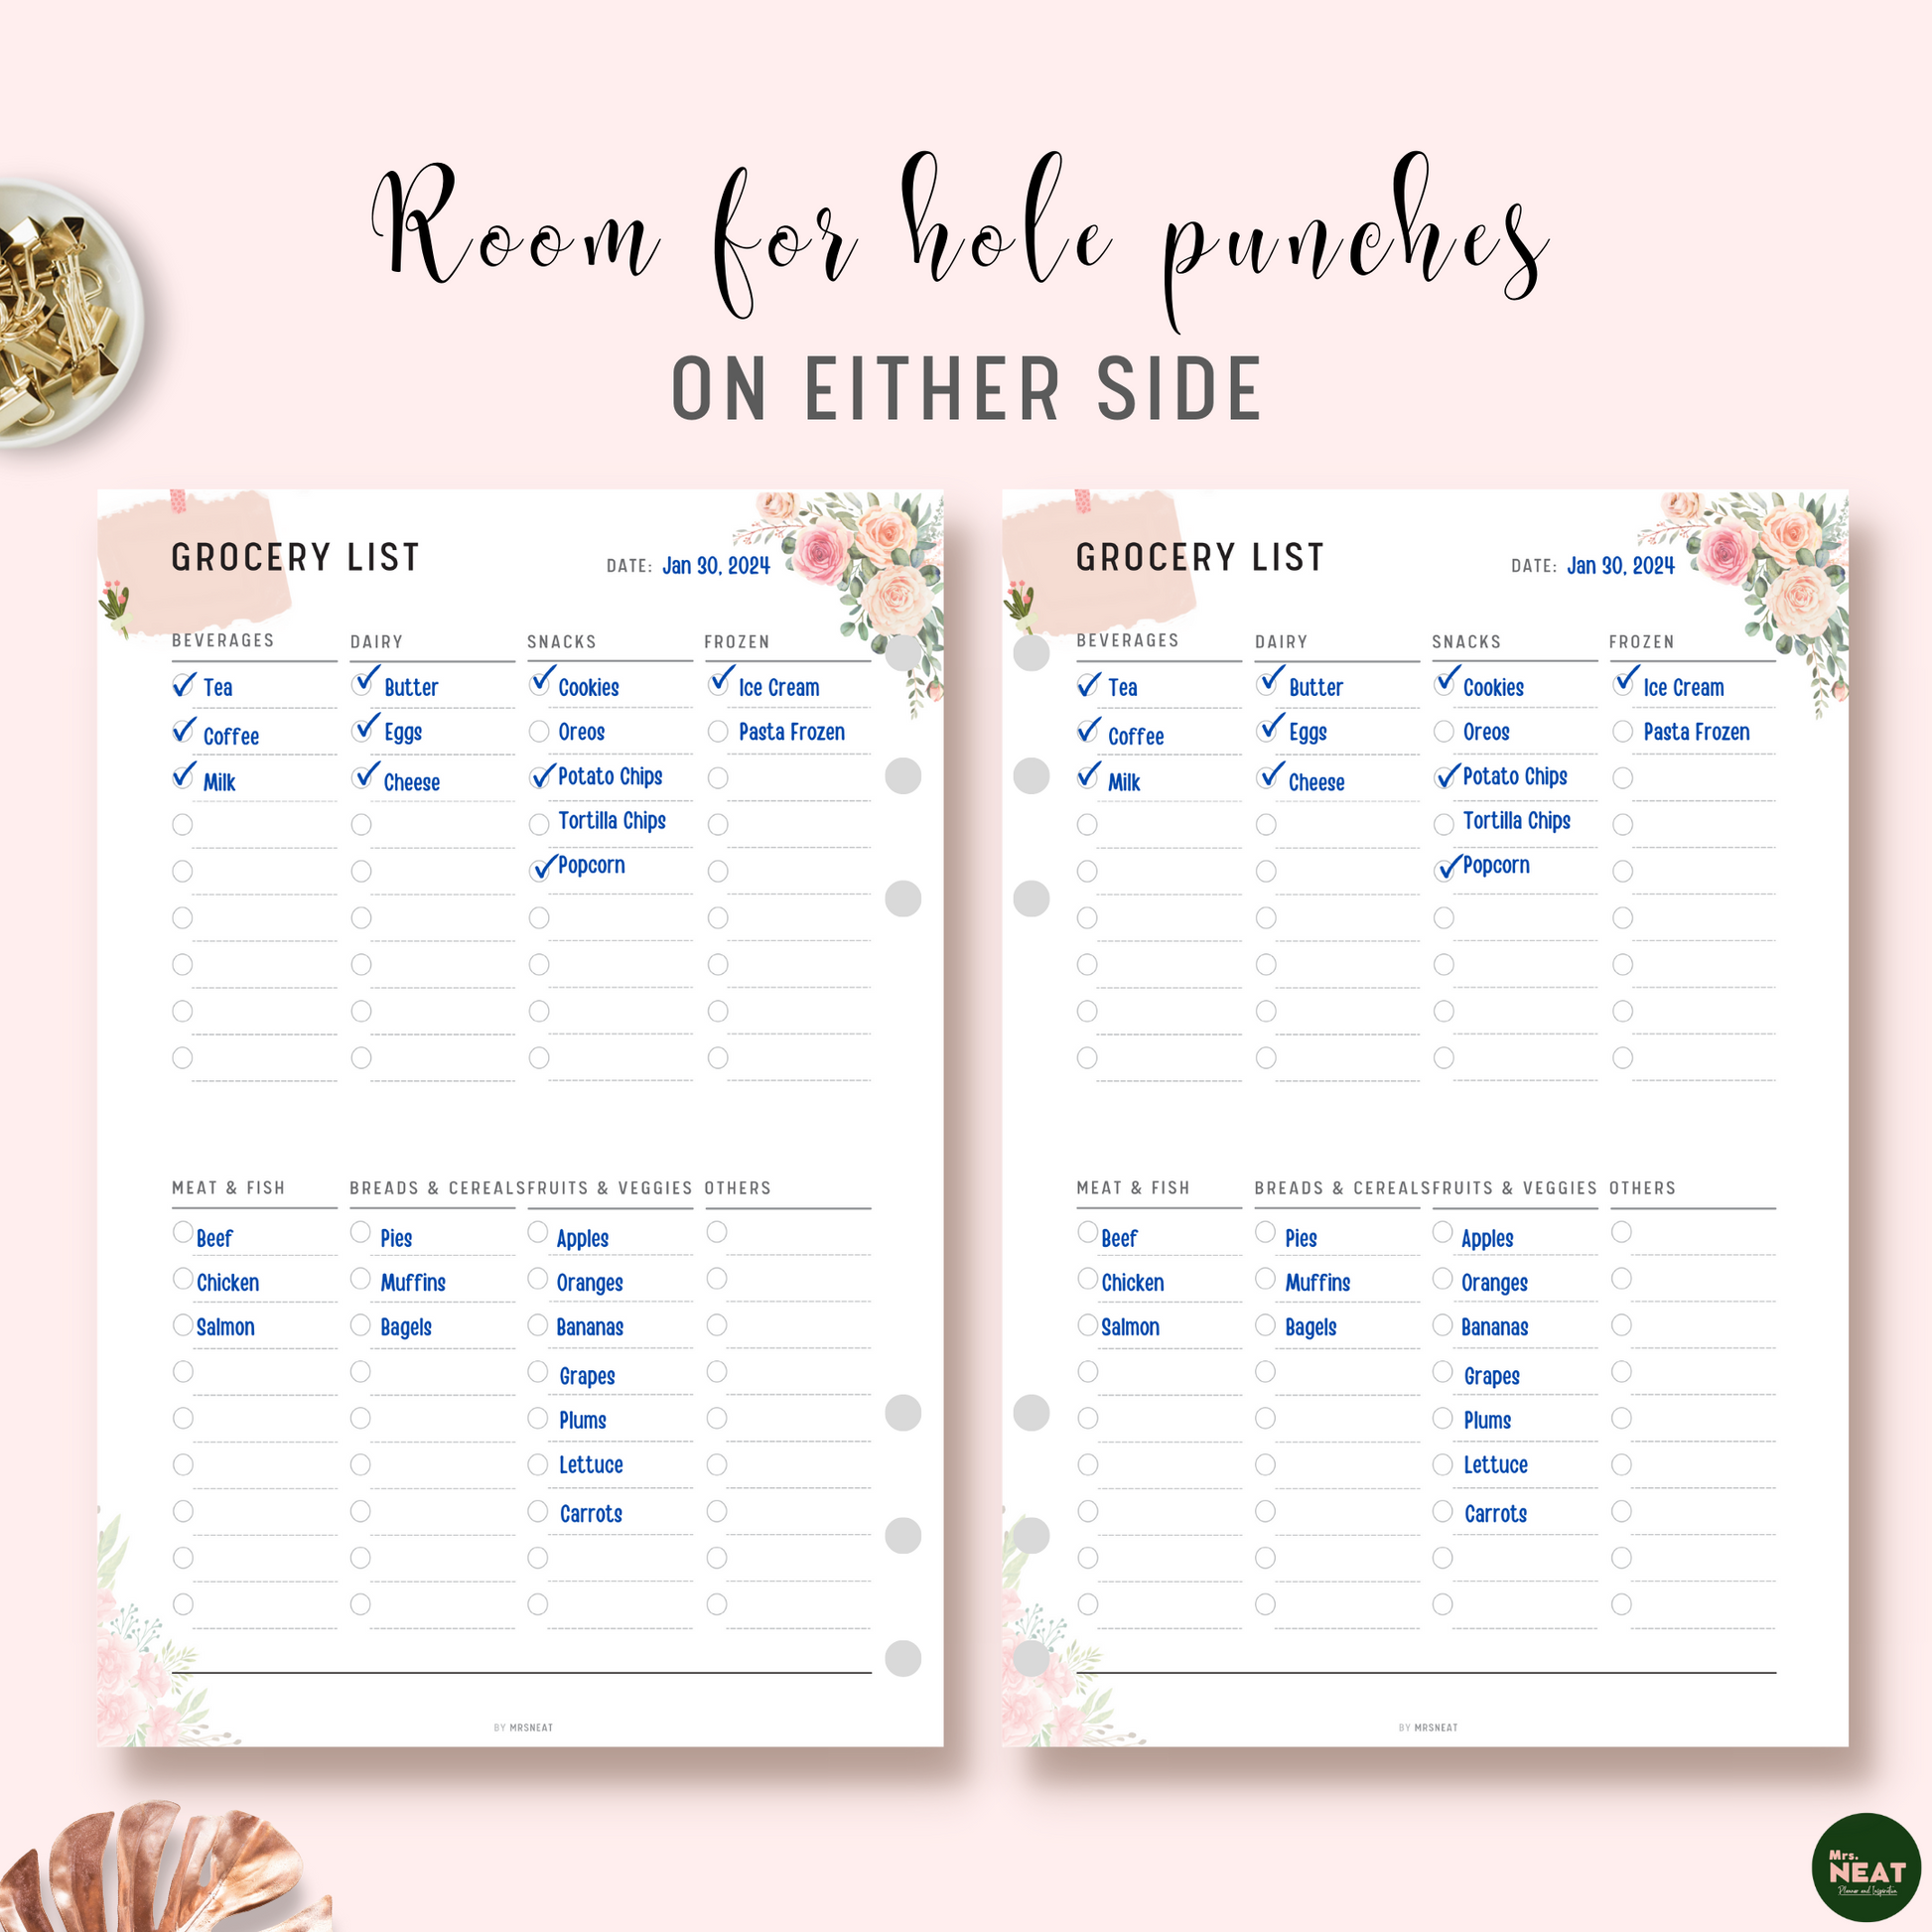 Floral Grocery List Printable Planner with room for hole punches on either side